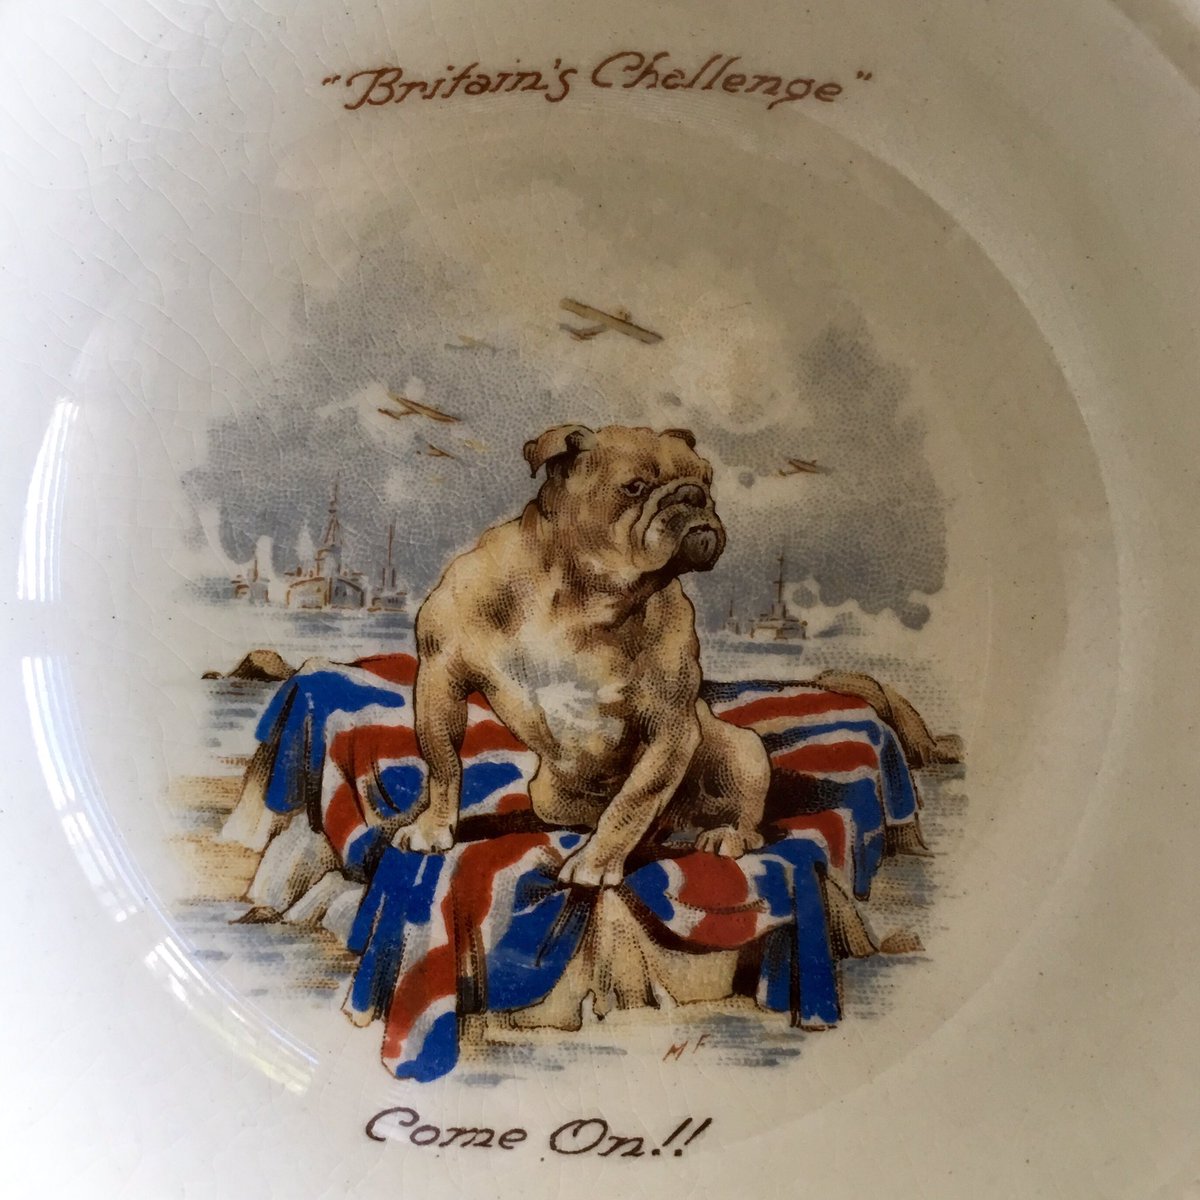 A closer look at my new baby plates reveal itty-bitty ships and aircraft. What the British bulldog is doing sitting on a rock draped in the Union Jack in the middle of the sea is anyone’s guess. Perhaps it is, as the text suggests, a challenge.